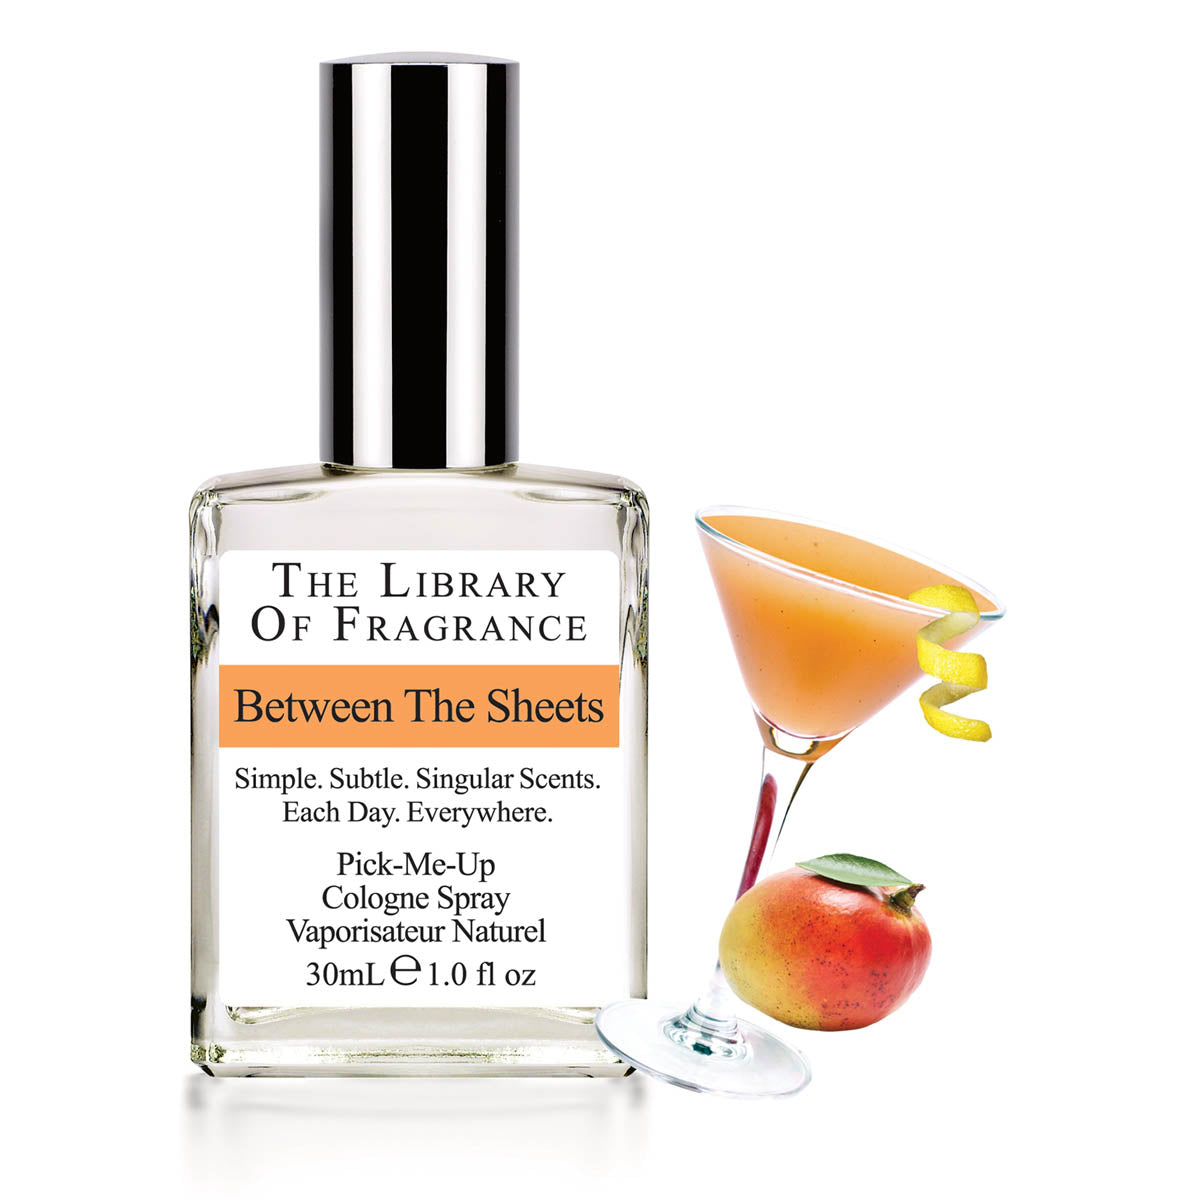 The Library Of Fragrance Between The Sheets 30ml Cologne AKA Demeter Fragrance